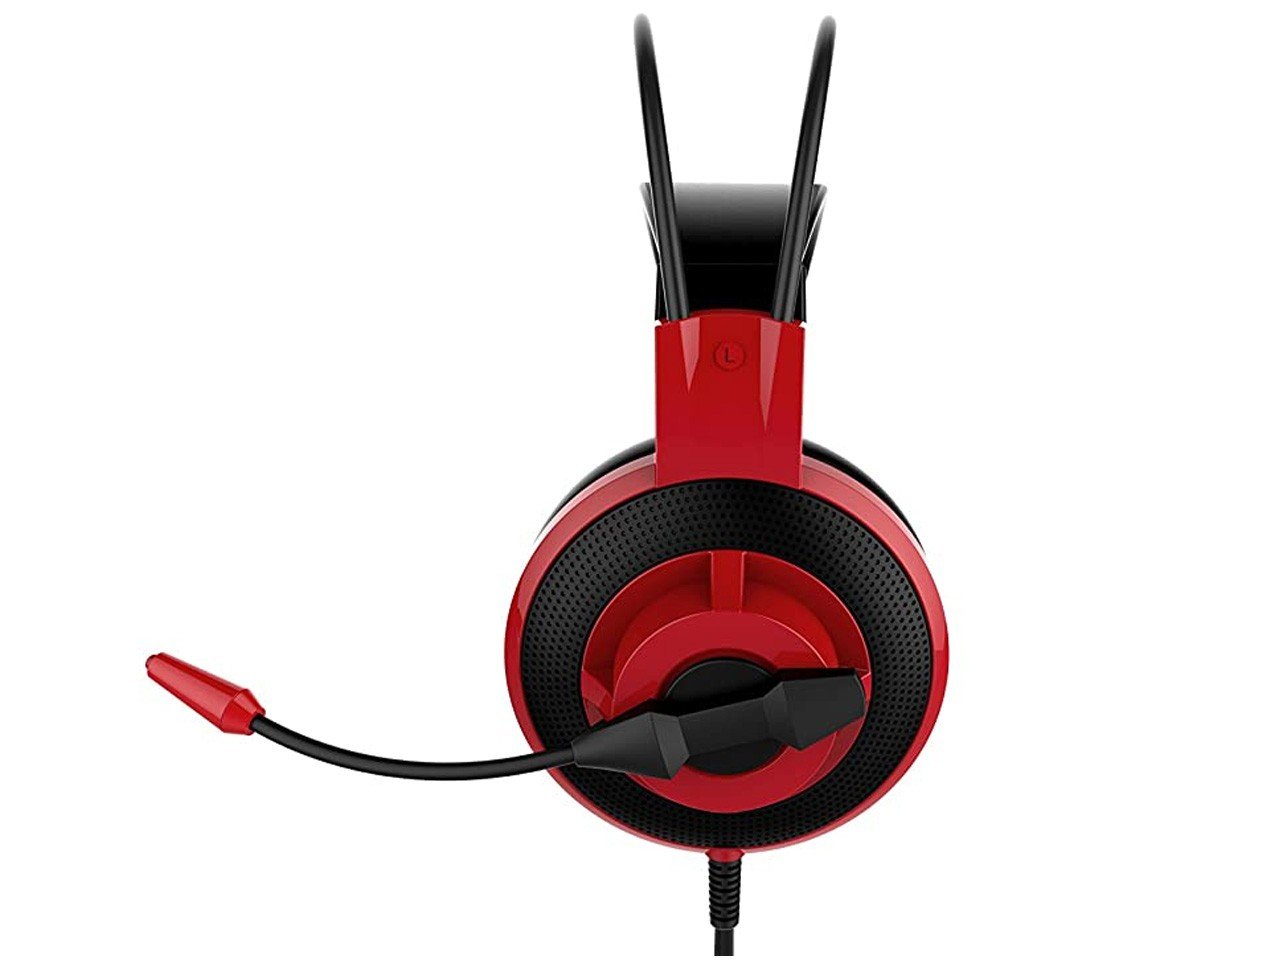 MSI DS501 Wired Gaming Headset with Microphone Black with Red